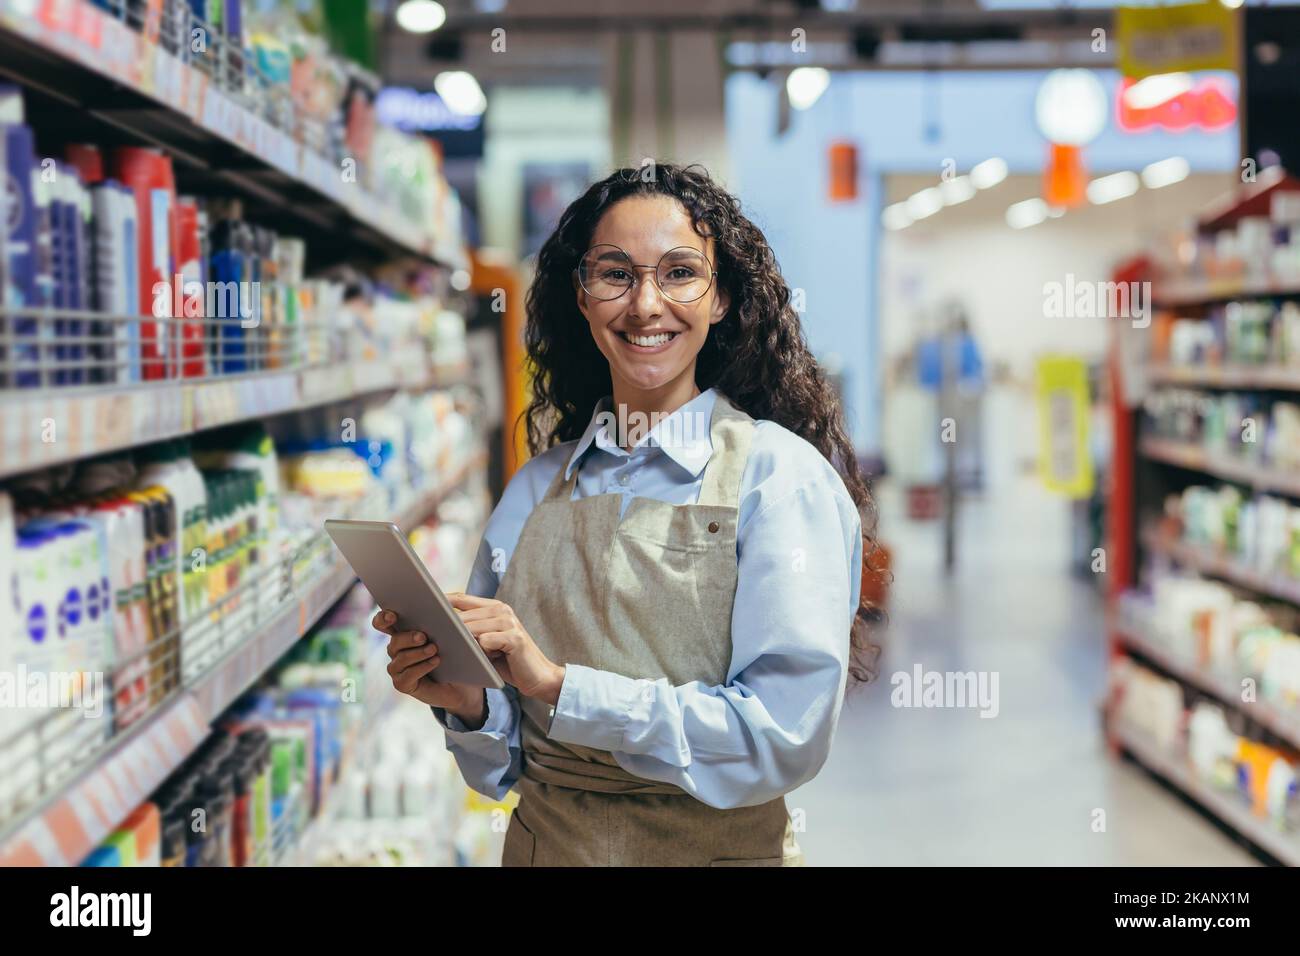 Portrait of happy and successful saleswoman, hispanic woman with curly hair smiling and looking at camera, using tablet computer to review product. Stock Photo